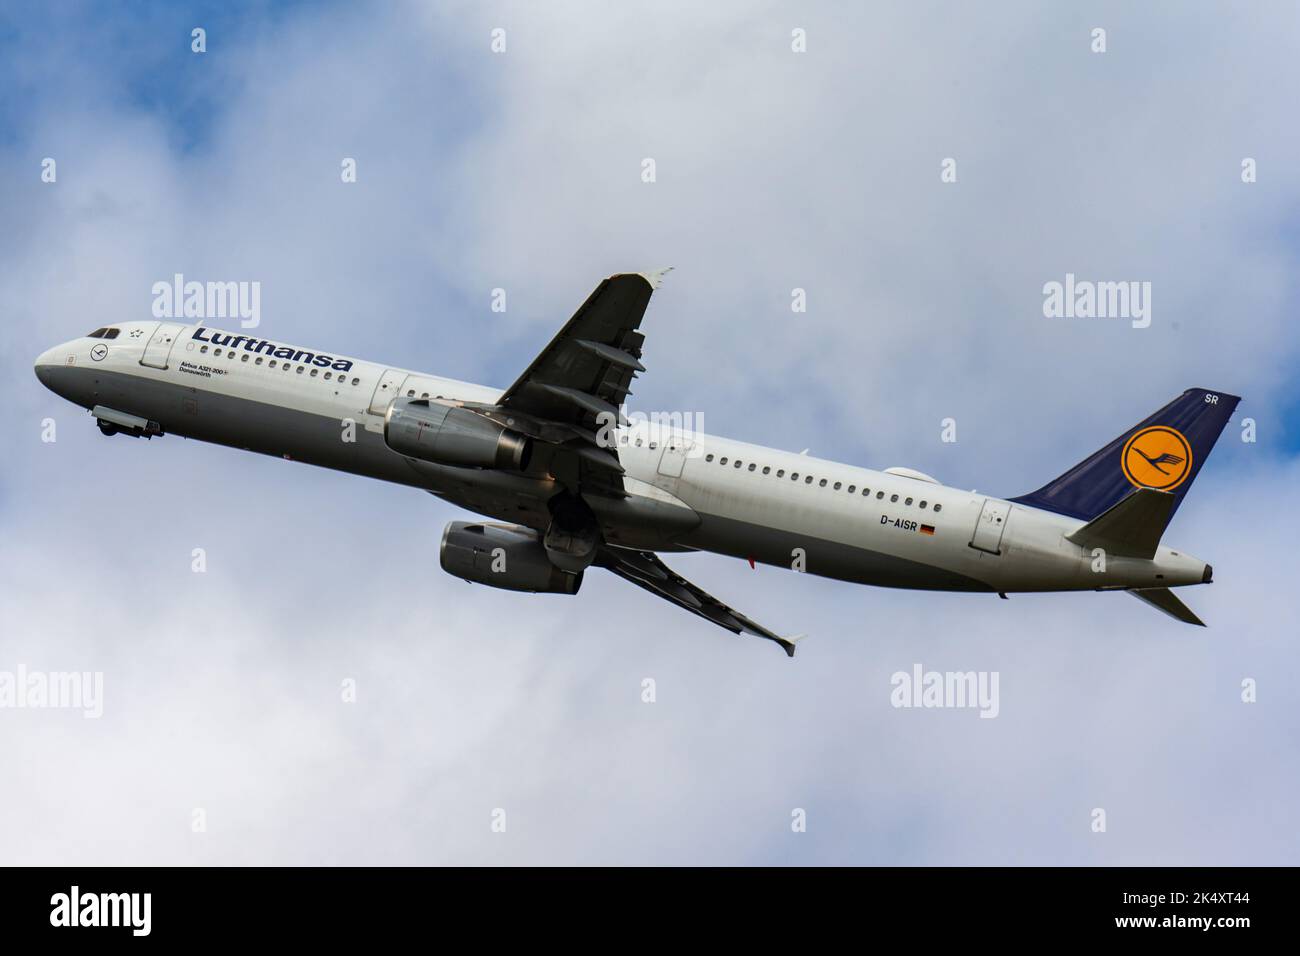 A beautiful view of a plane  Lufthansa Airbus A321-200, sorrowing through the bright blue sky Stock Photo